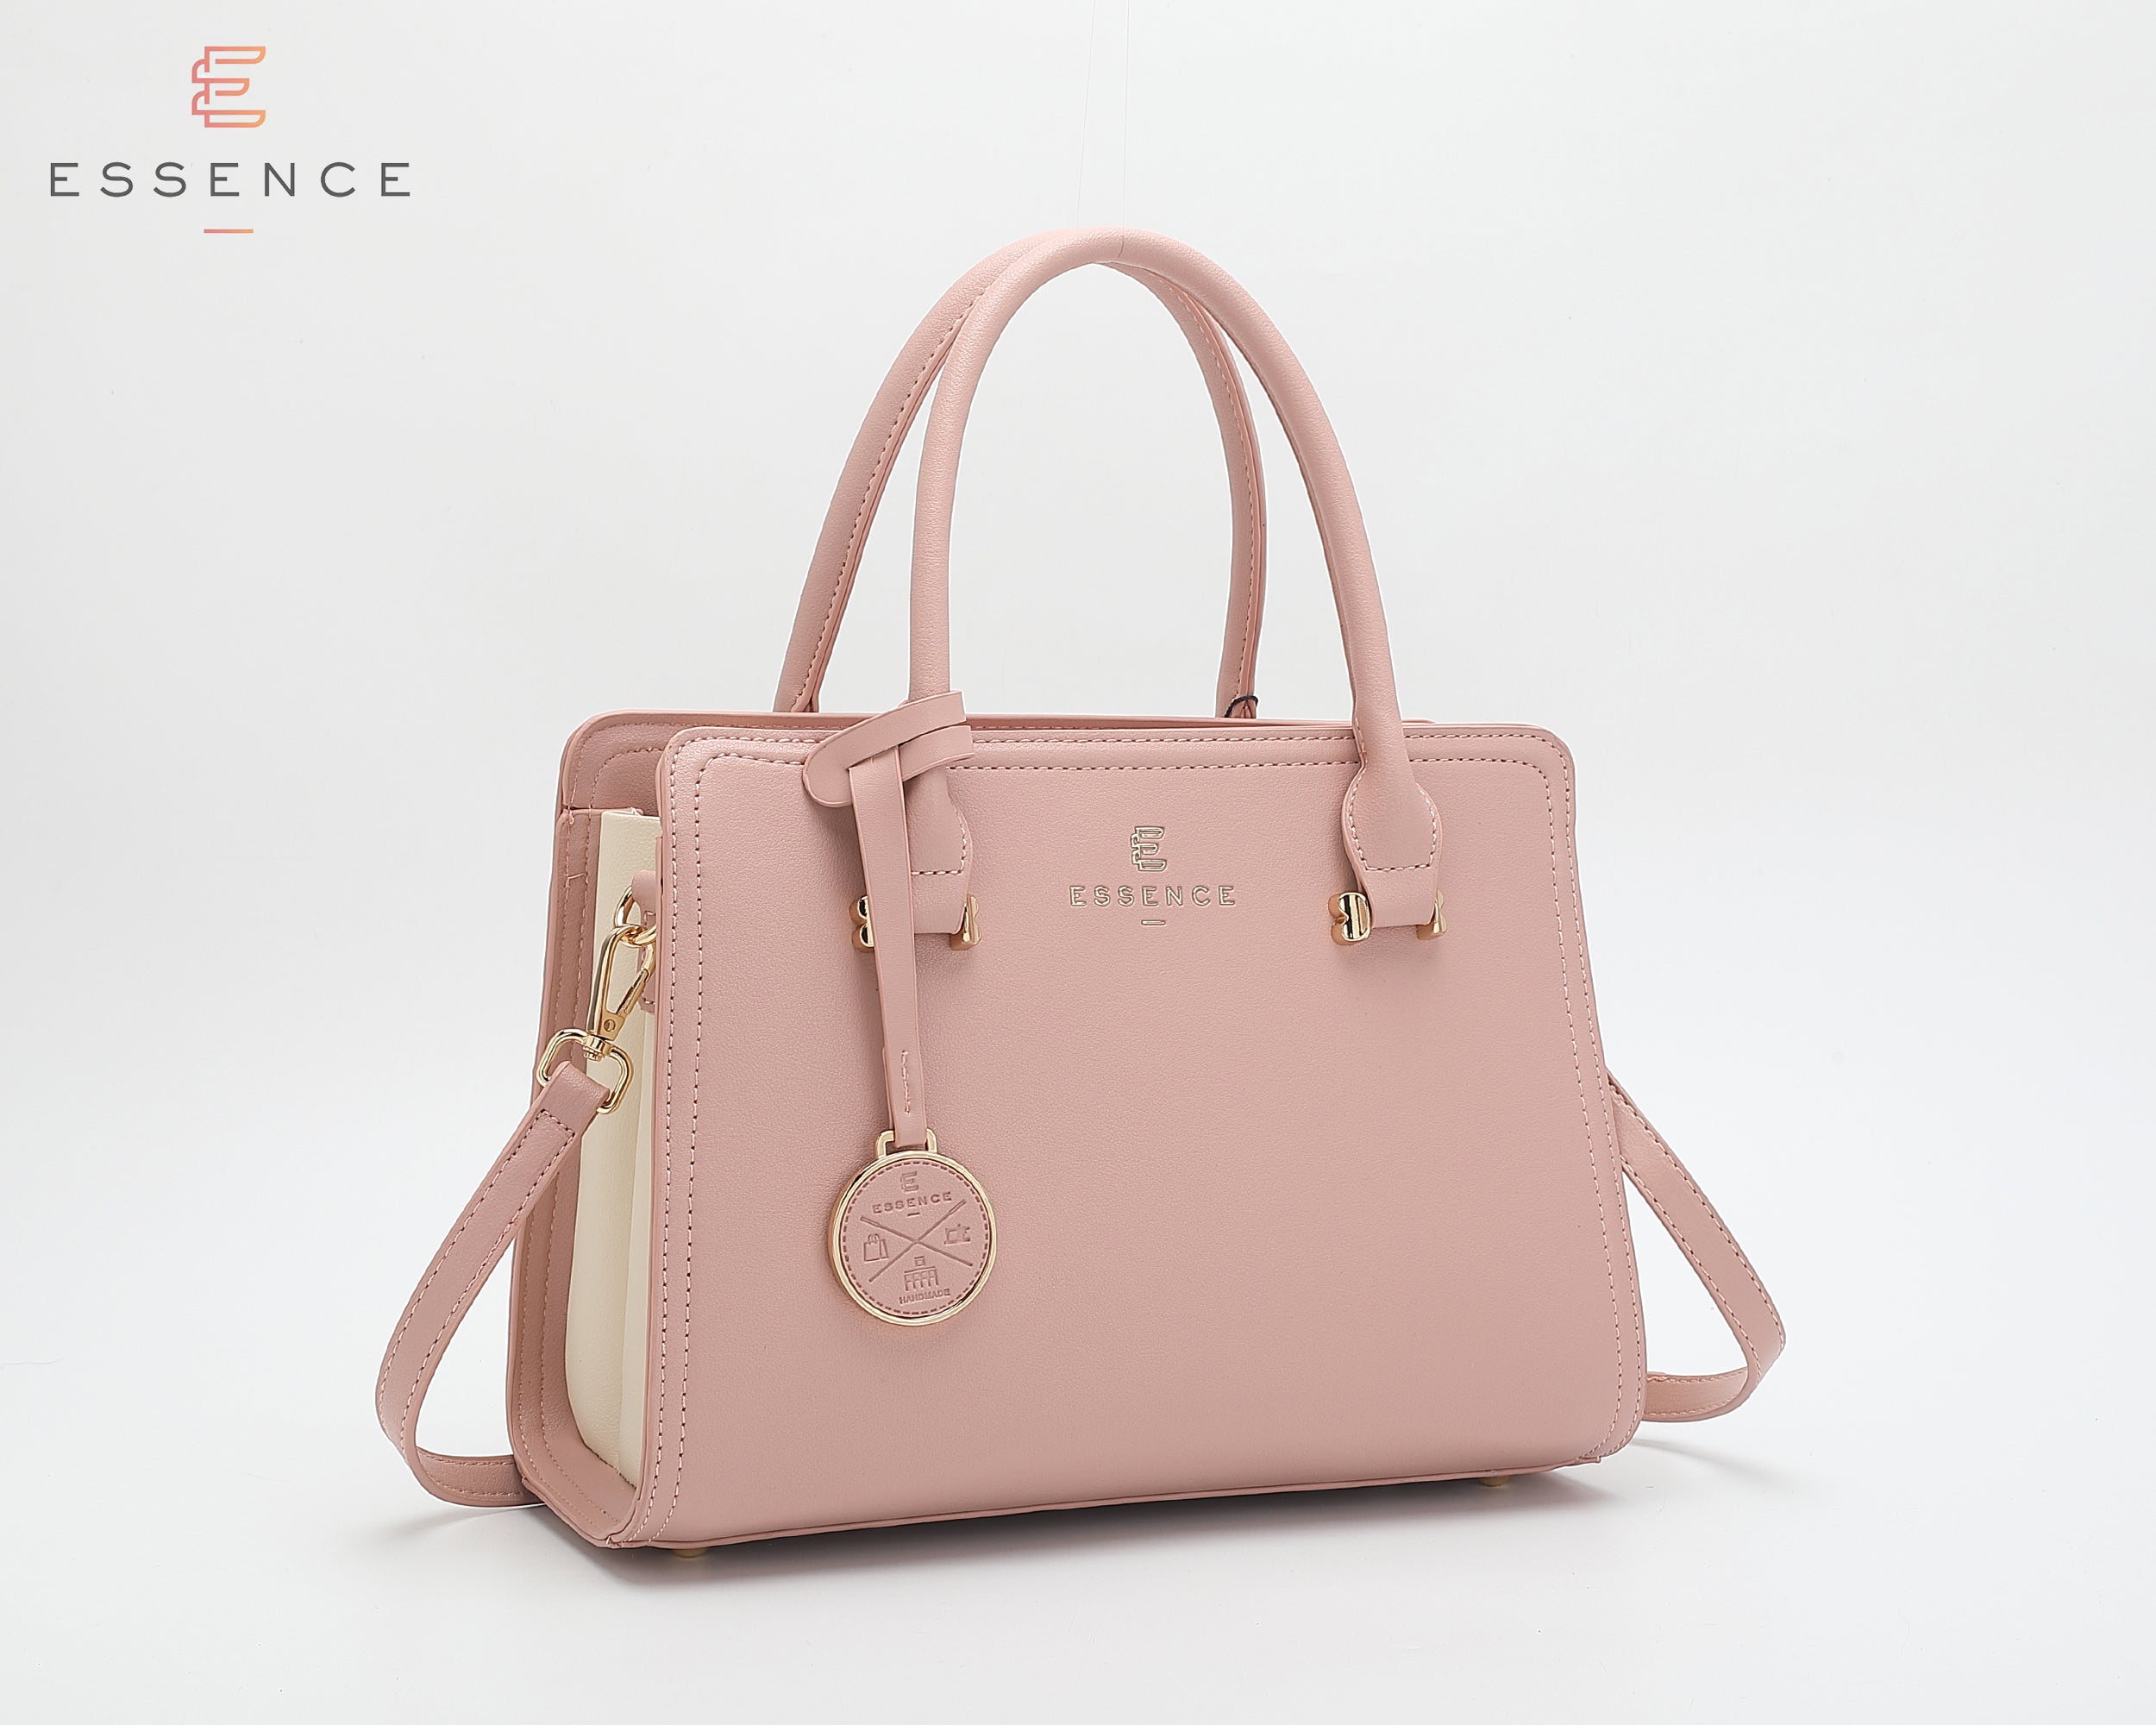 Buy Elegant and Stylish Pink color handbag / Purse for Women / Girls at  Amazon.in